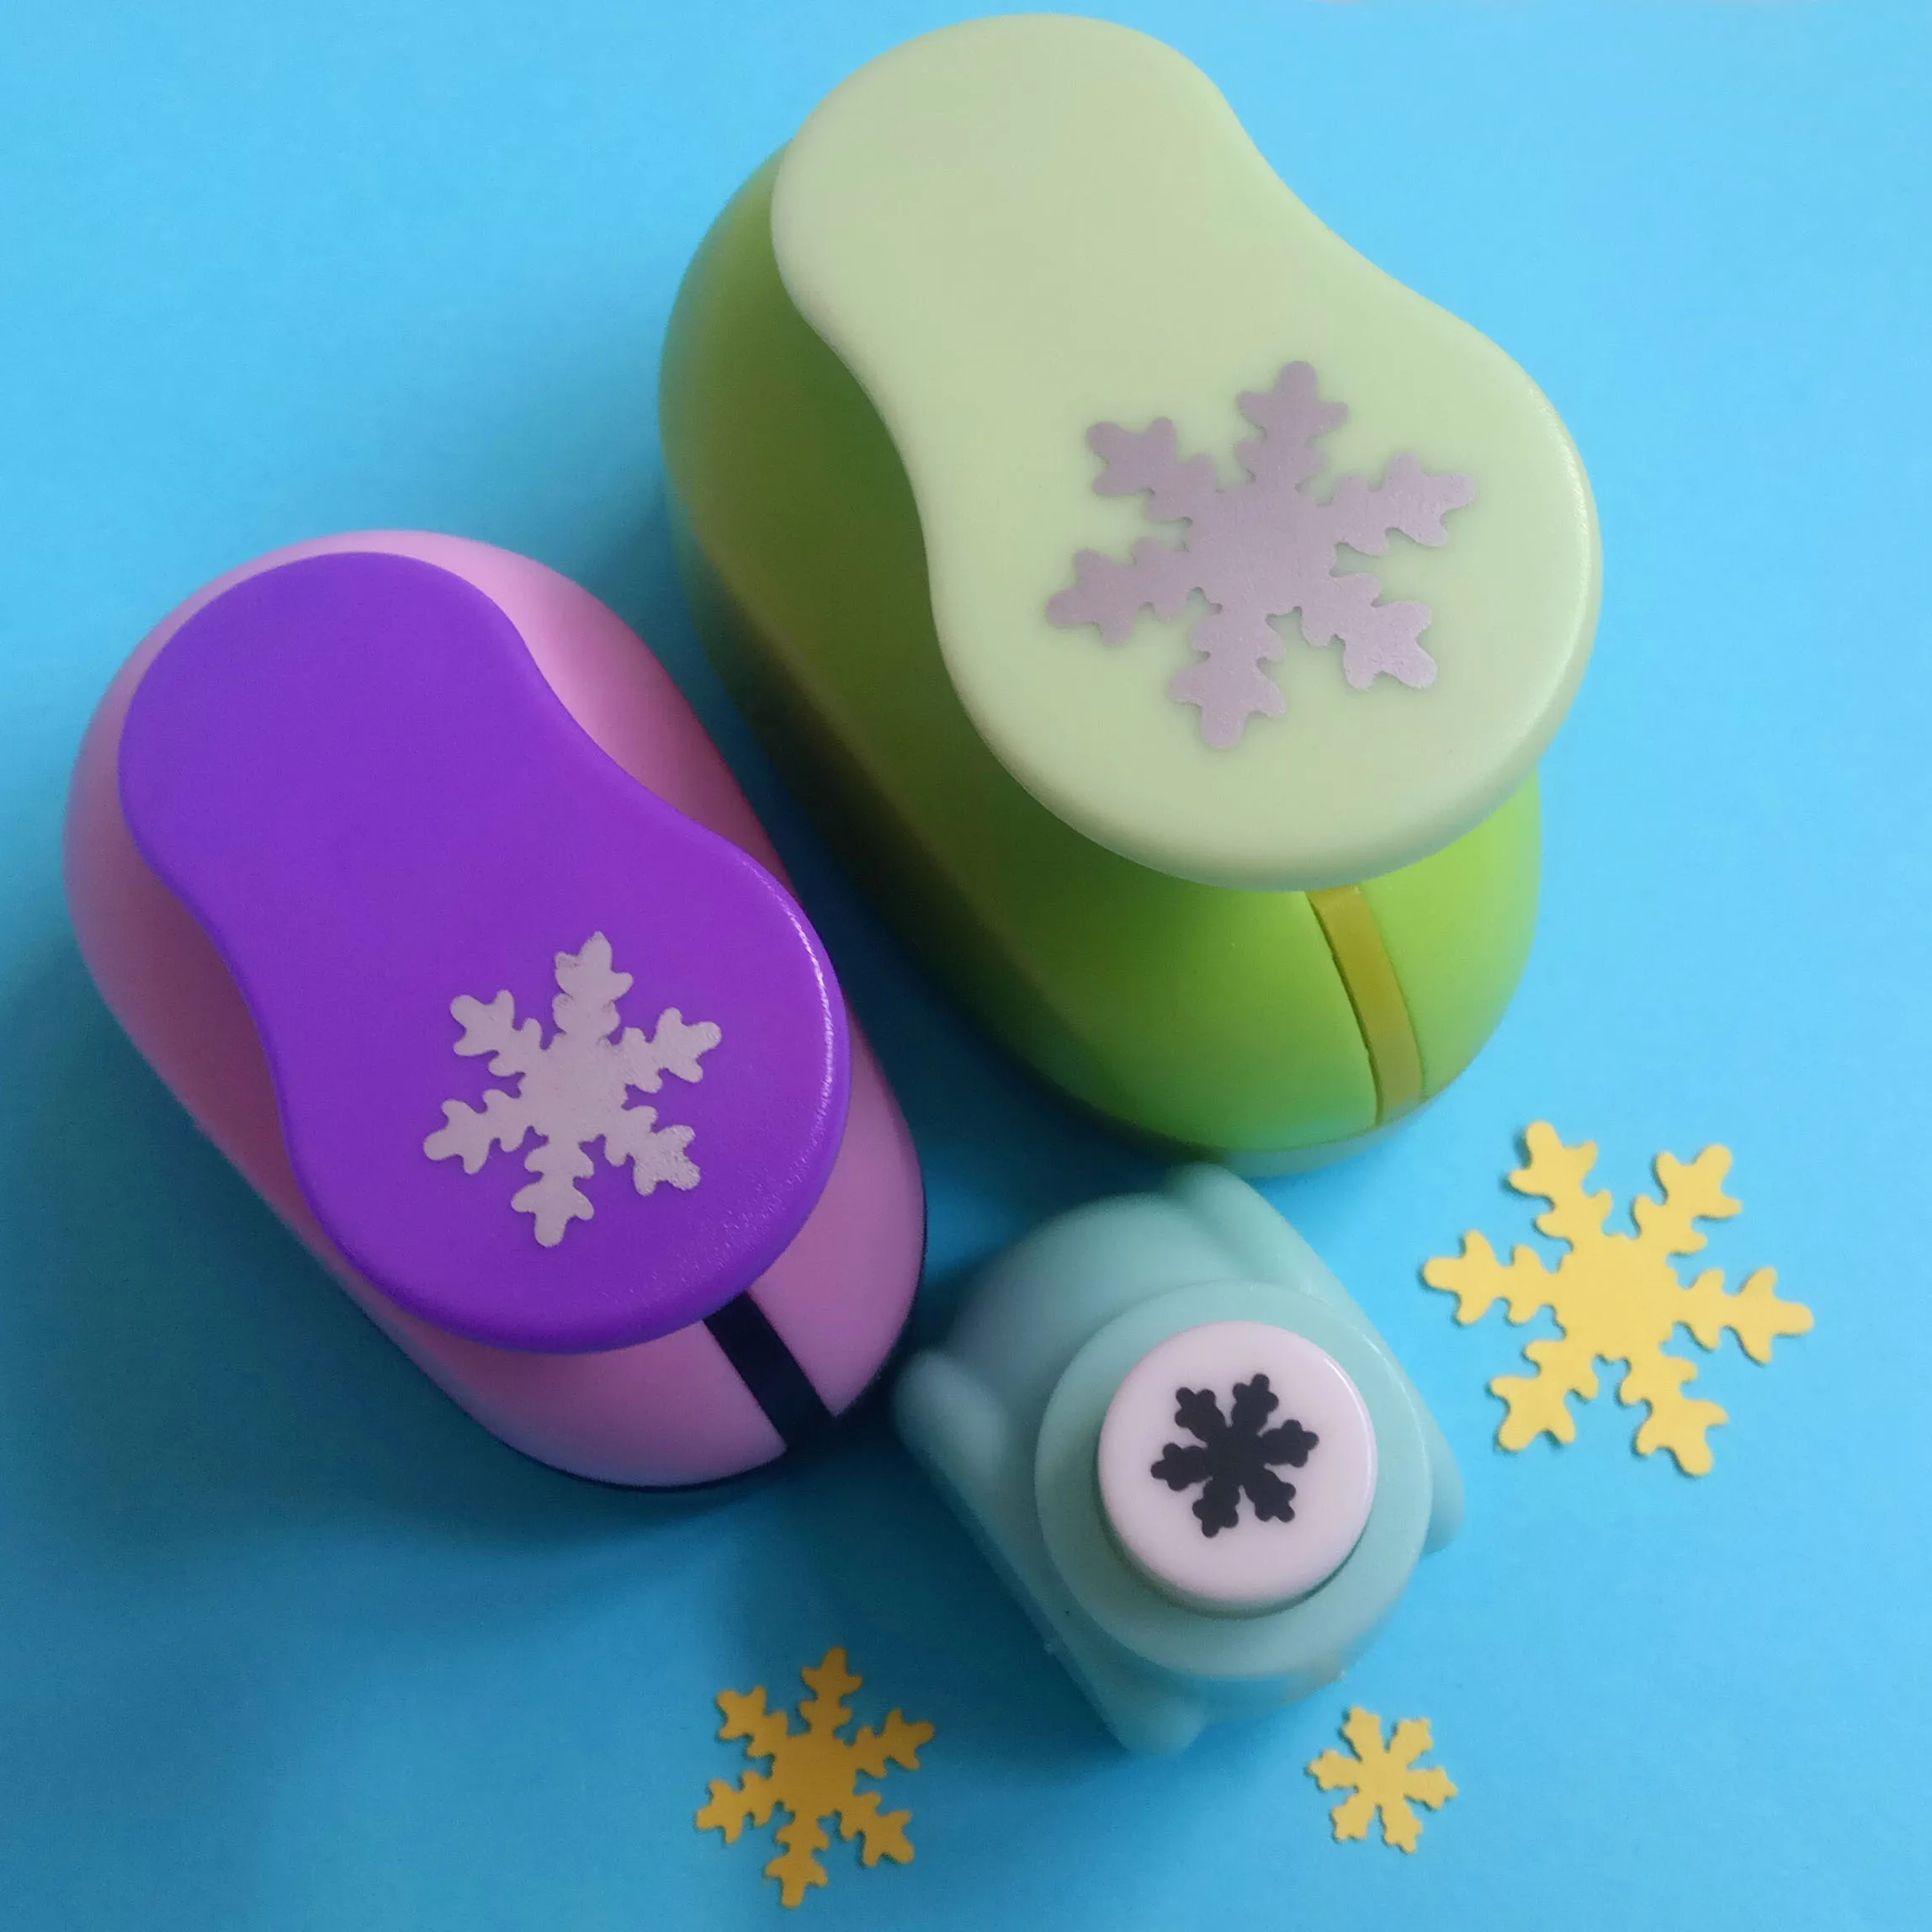 Different Size Snowflake Shaped Craft Punch Child Diy Tools Paper Cutter  Eva Scrapbook Christmas Snow Hole Puncher